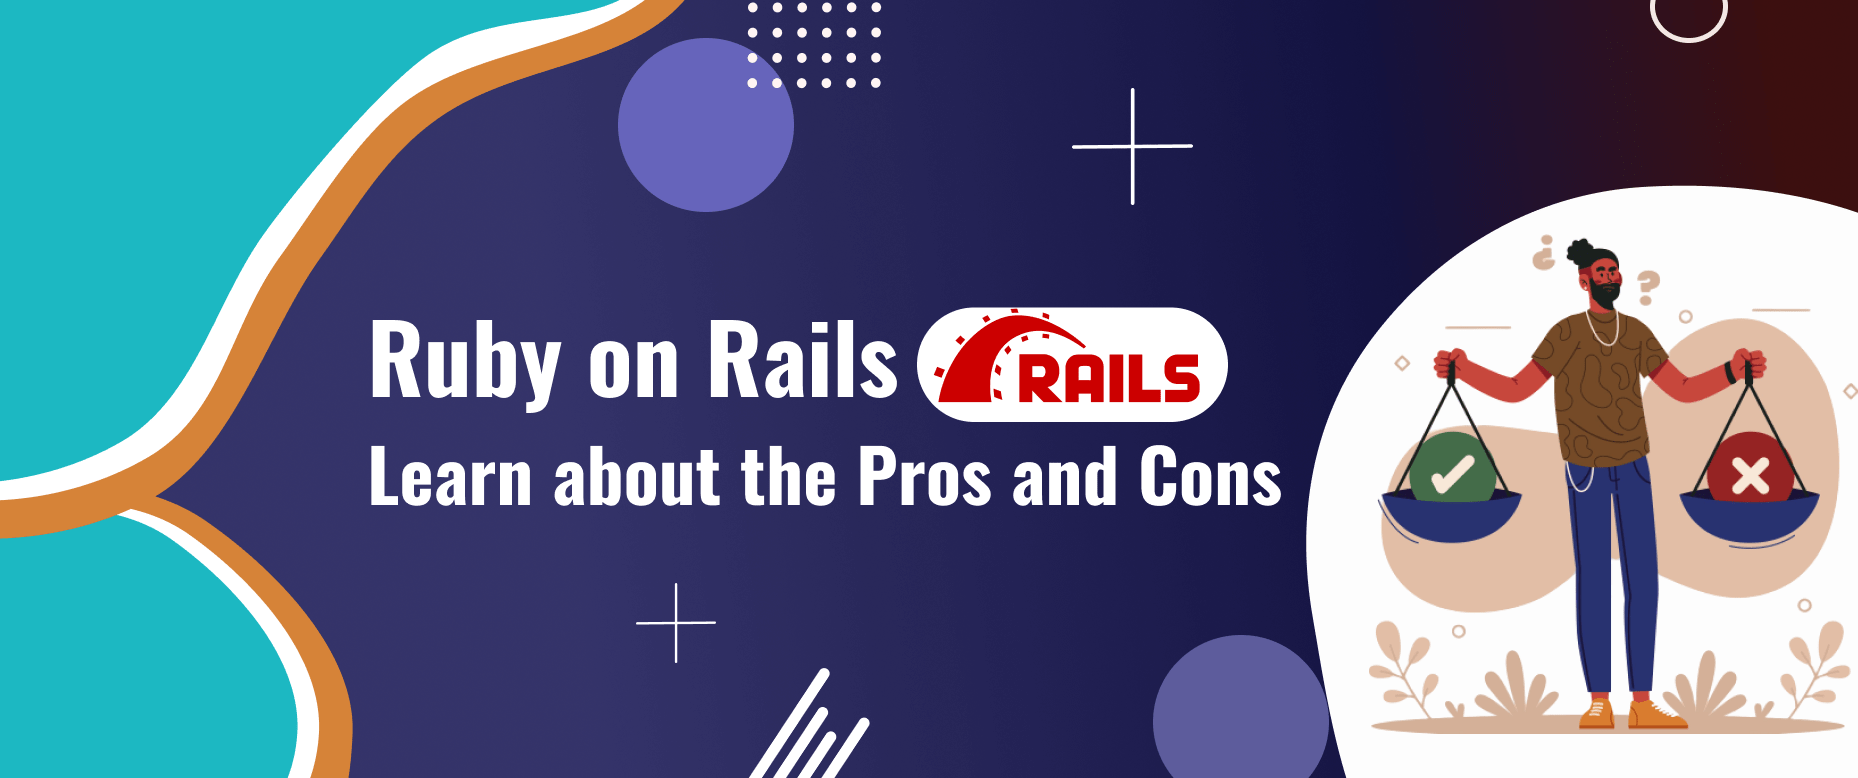 Ruby on Rails Learn about the Pros and Cons pyzen technologies